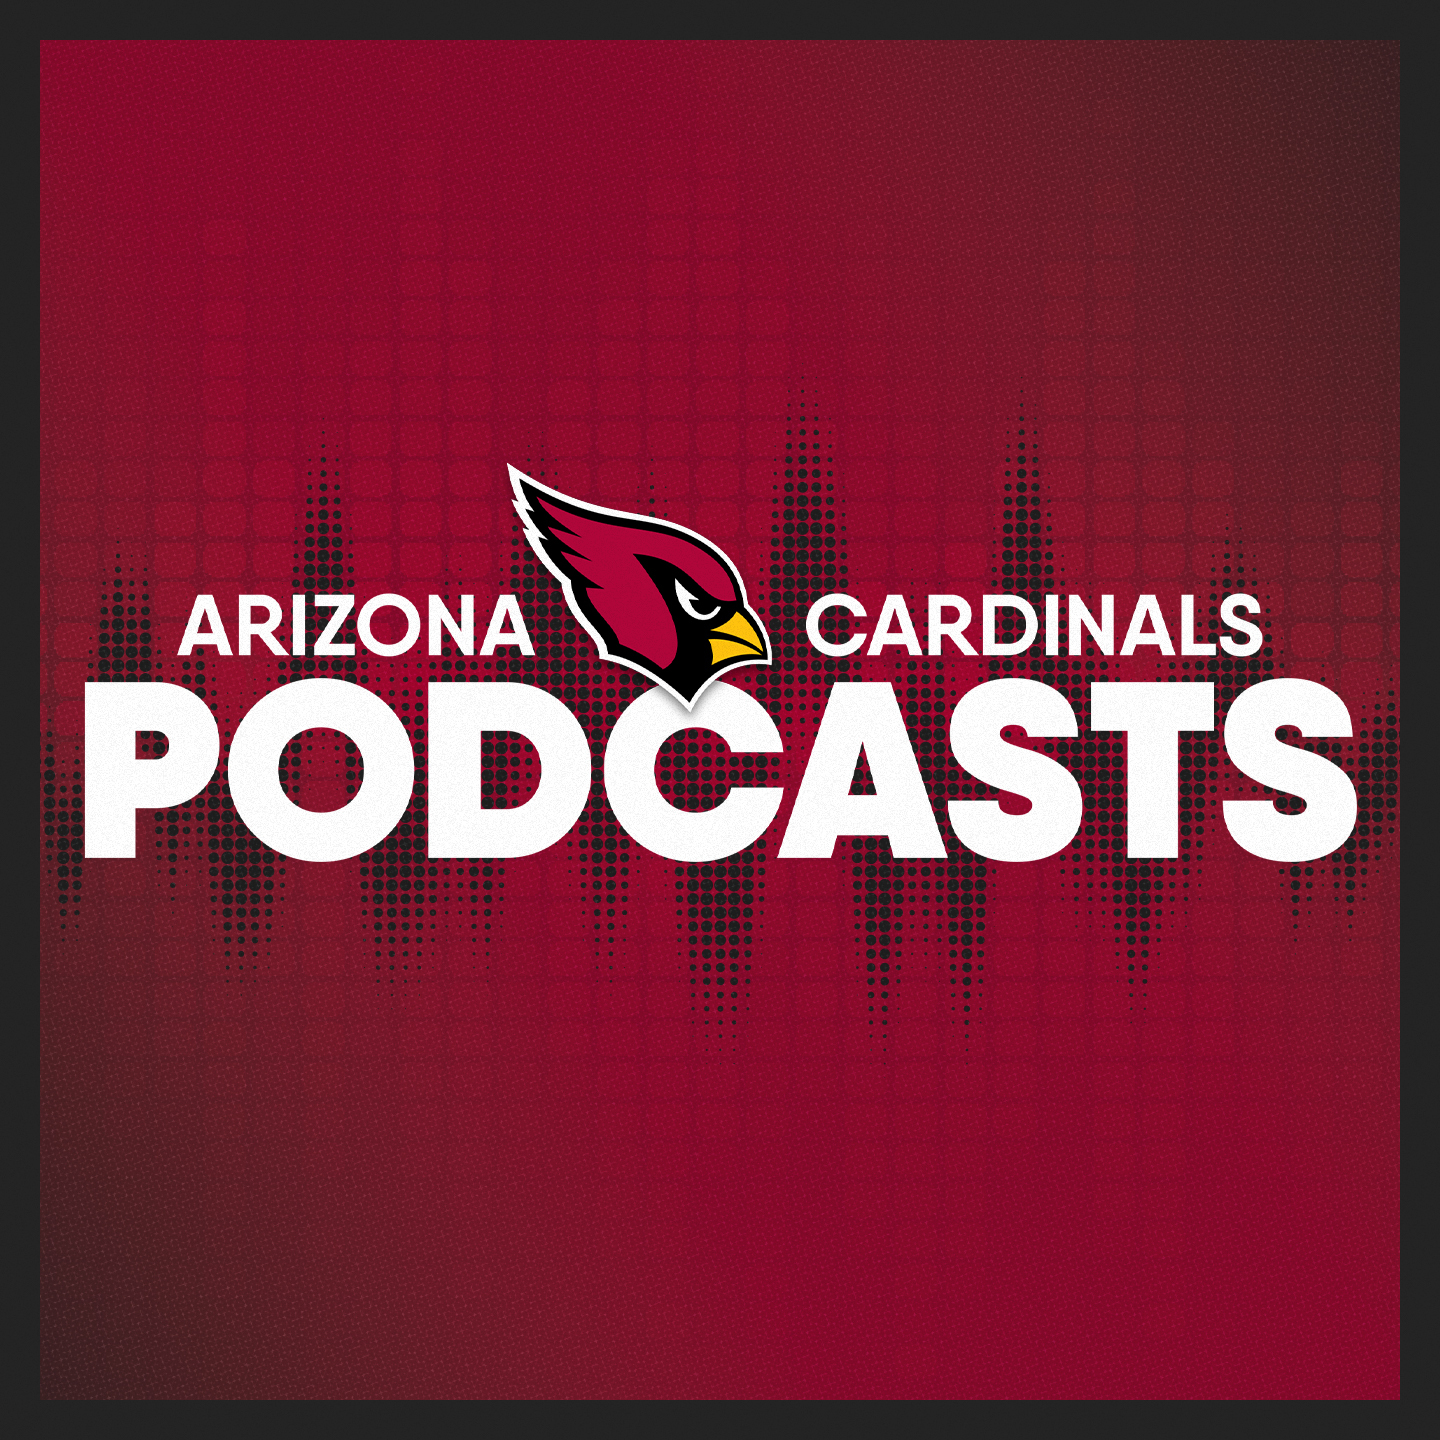 Cardinals Cover 2 - Will James Conner Return To AZ In 2022?